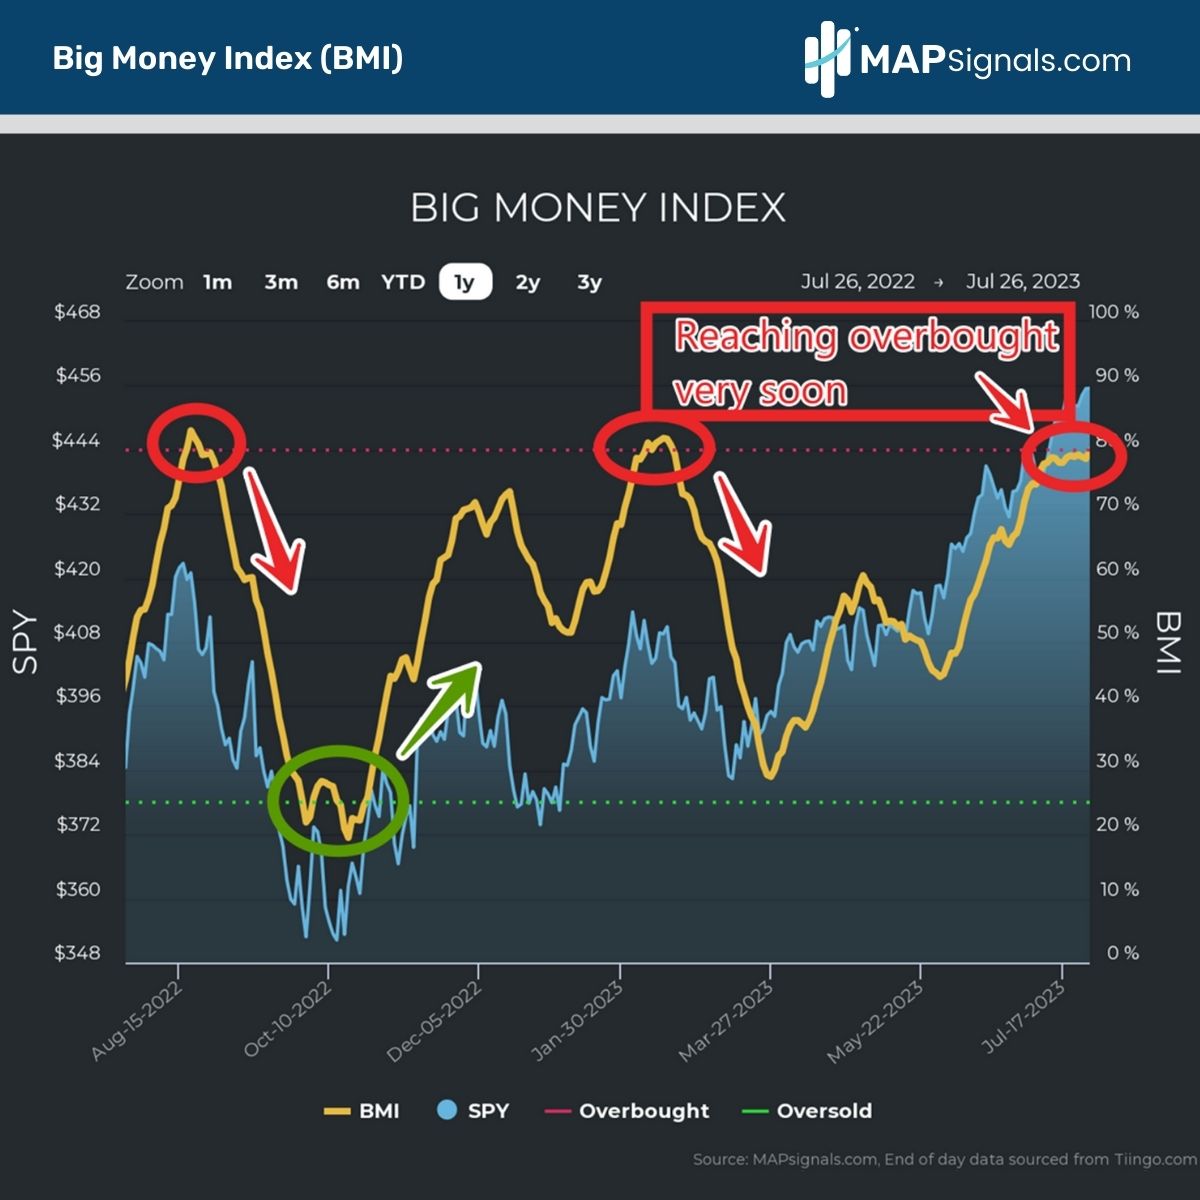 Big Money Index (BMI) reaching Overbought soon | MAPsignals